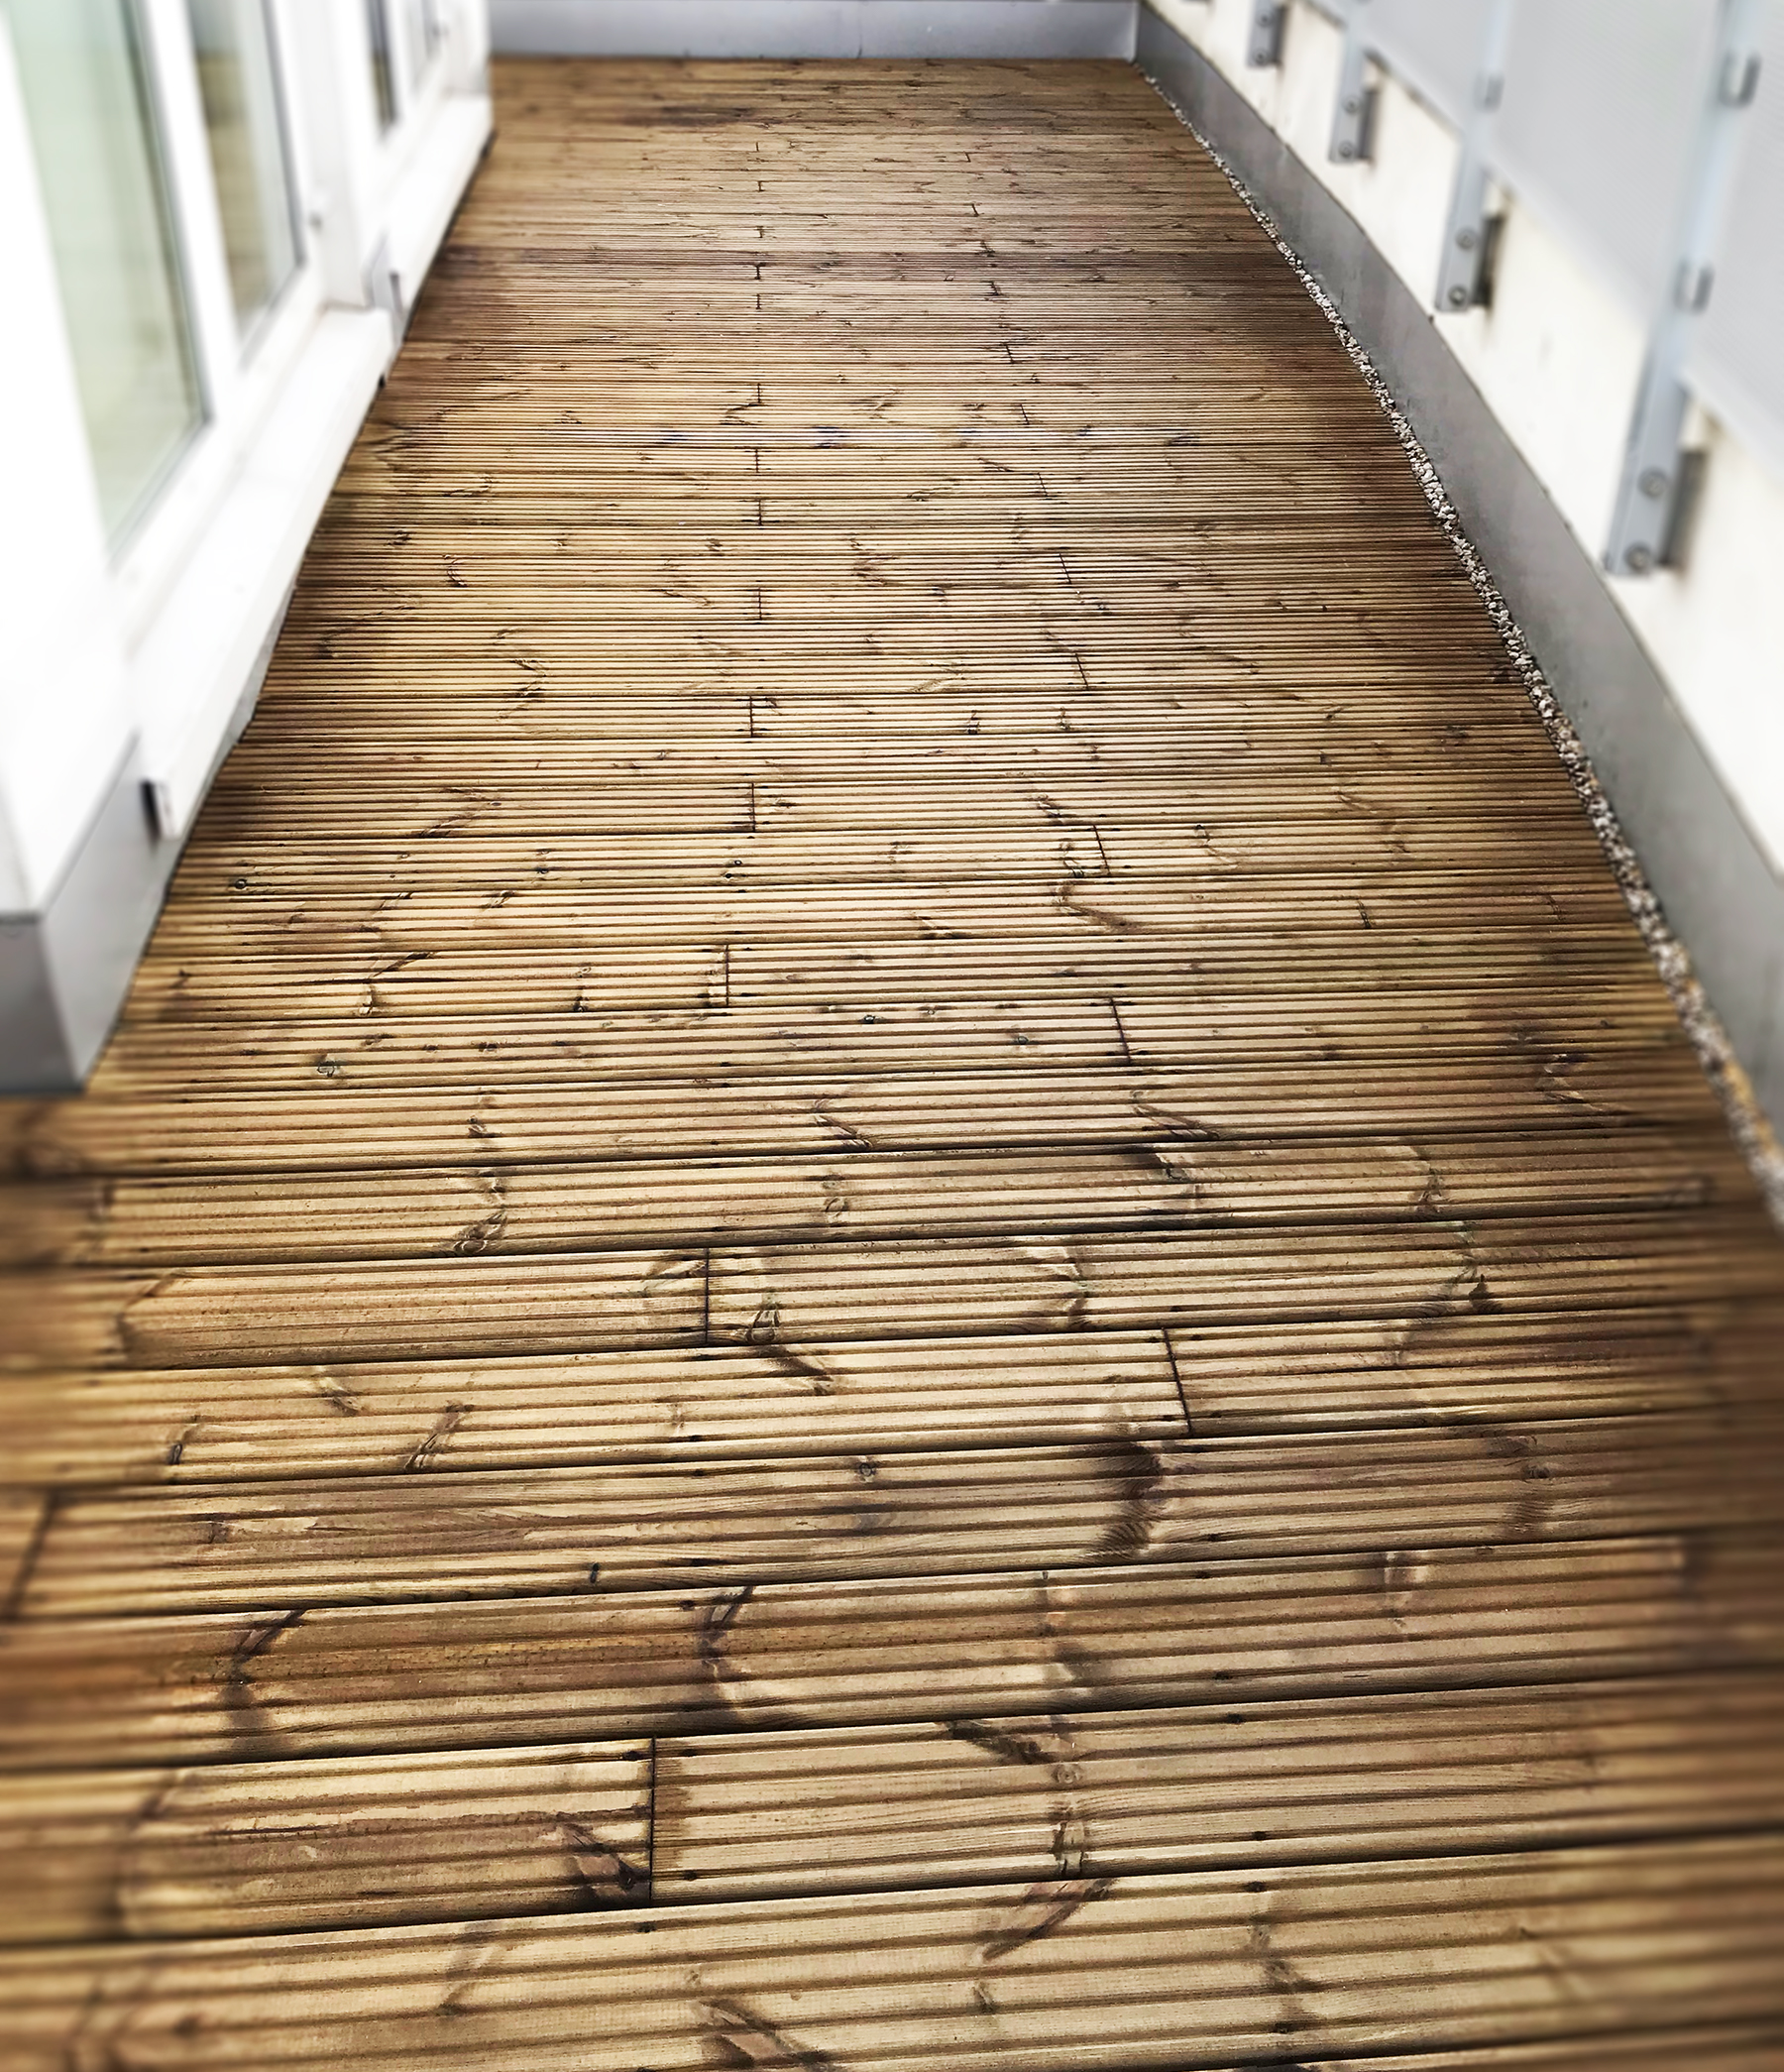 Newly Laid Decking